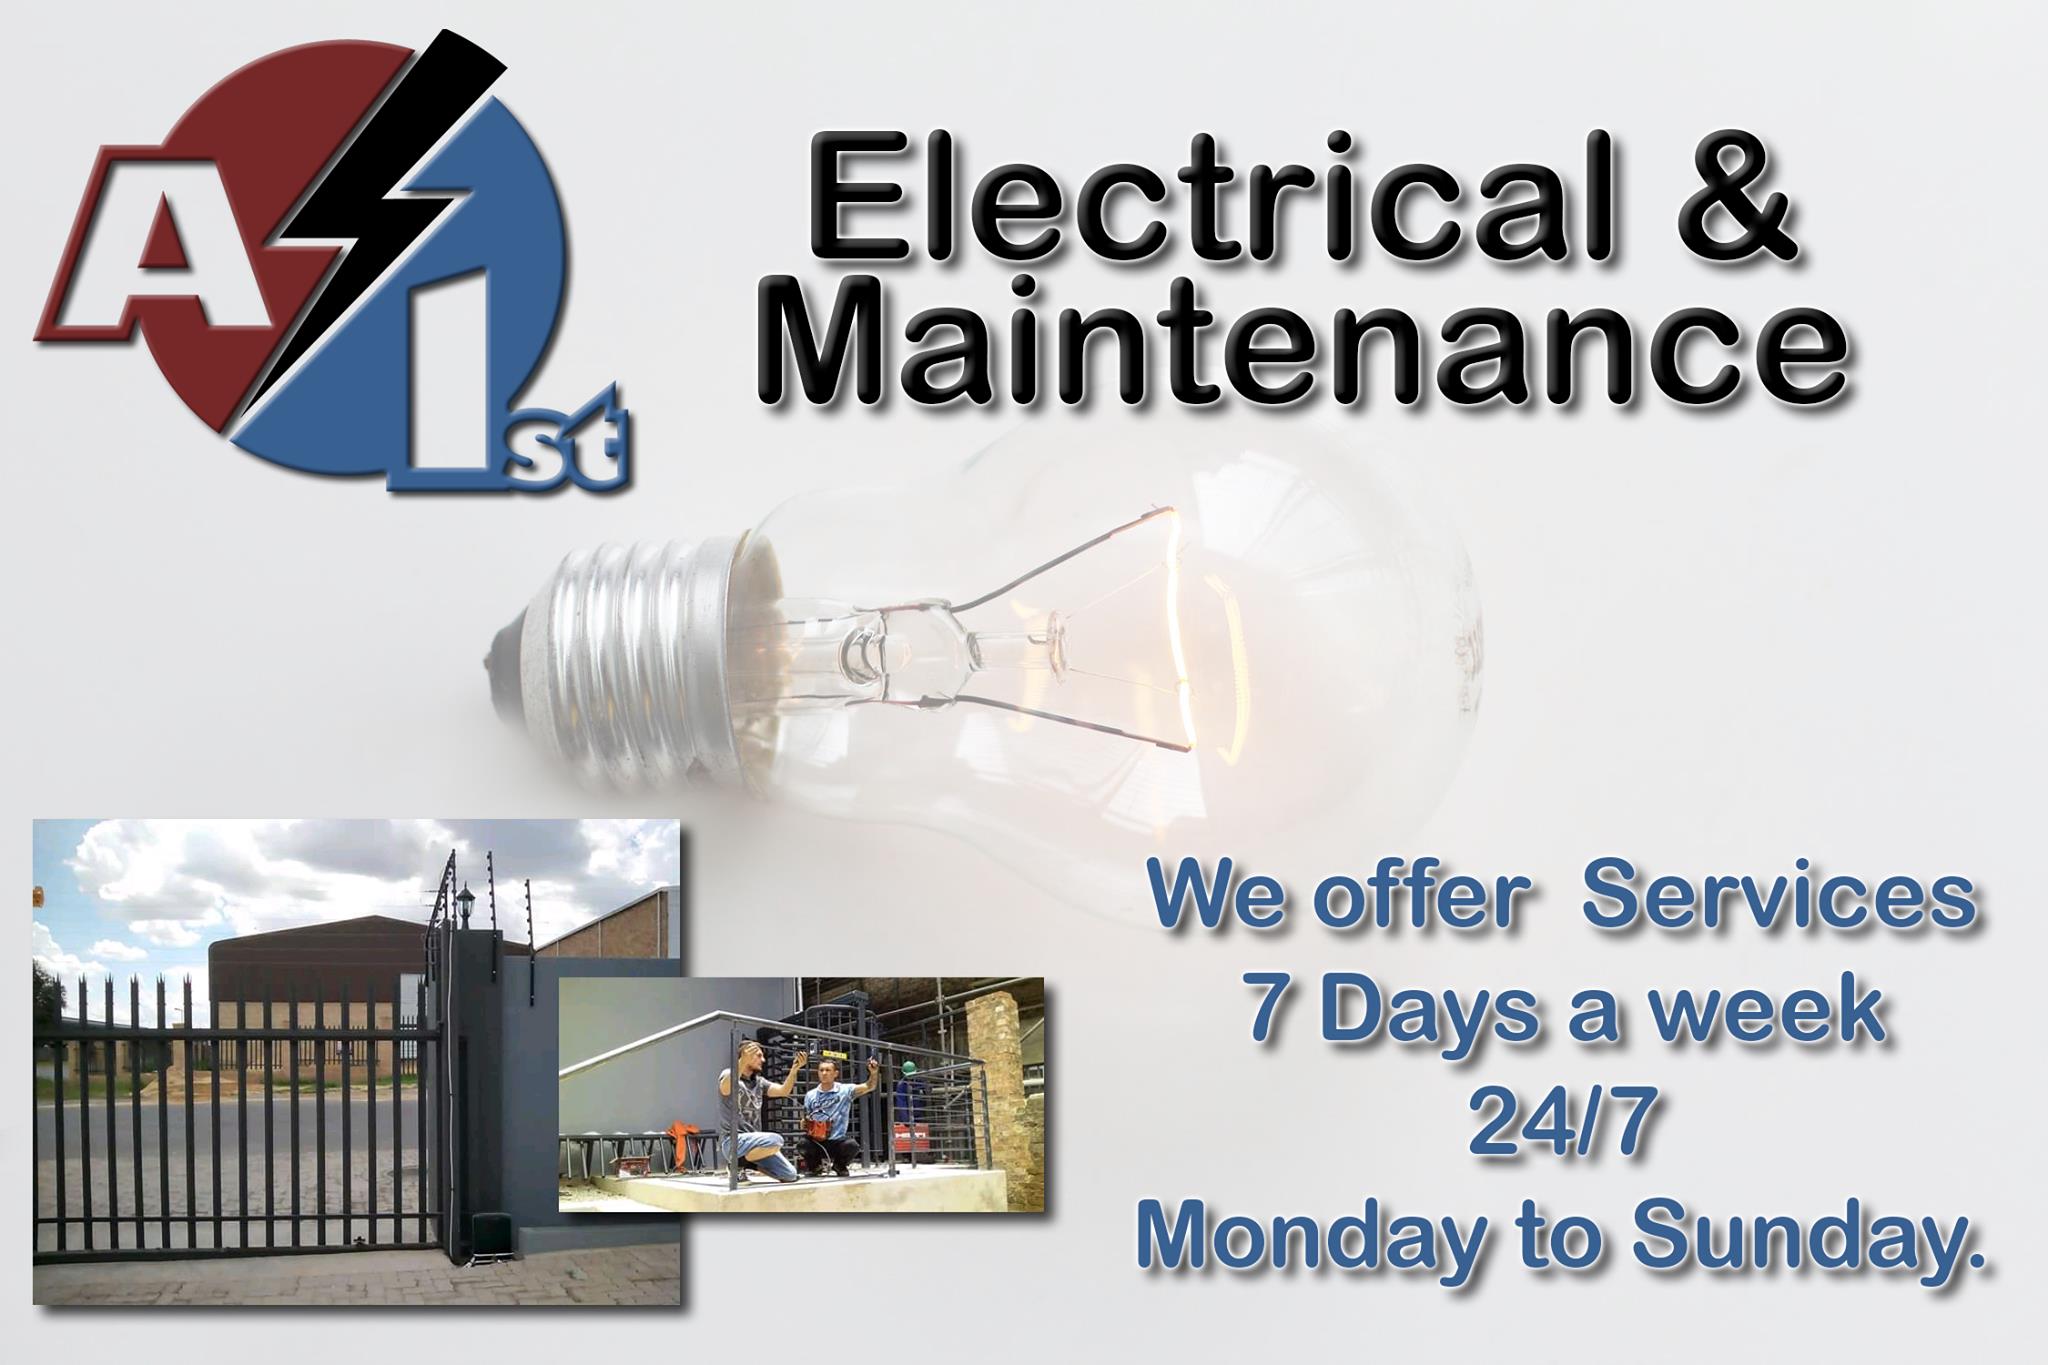 A 1st Electrical & Maintenance